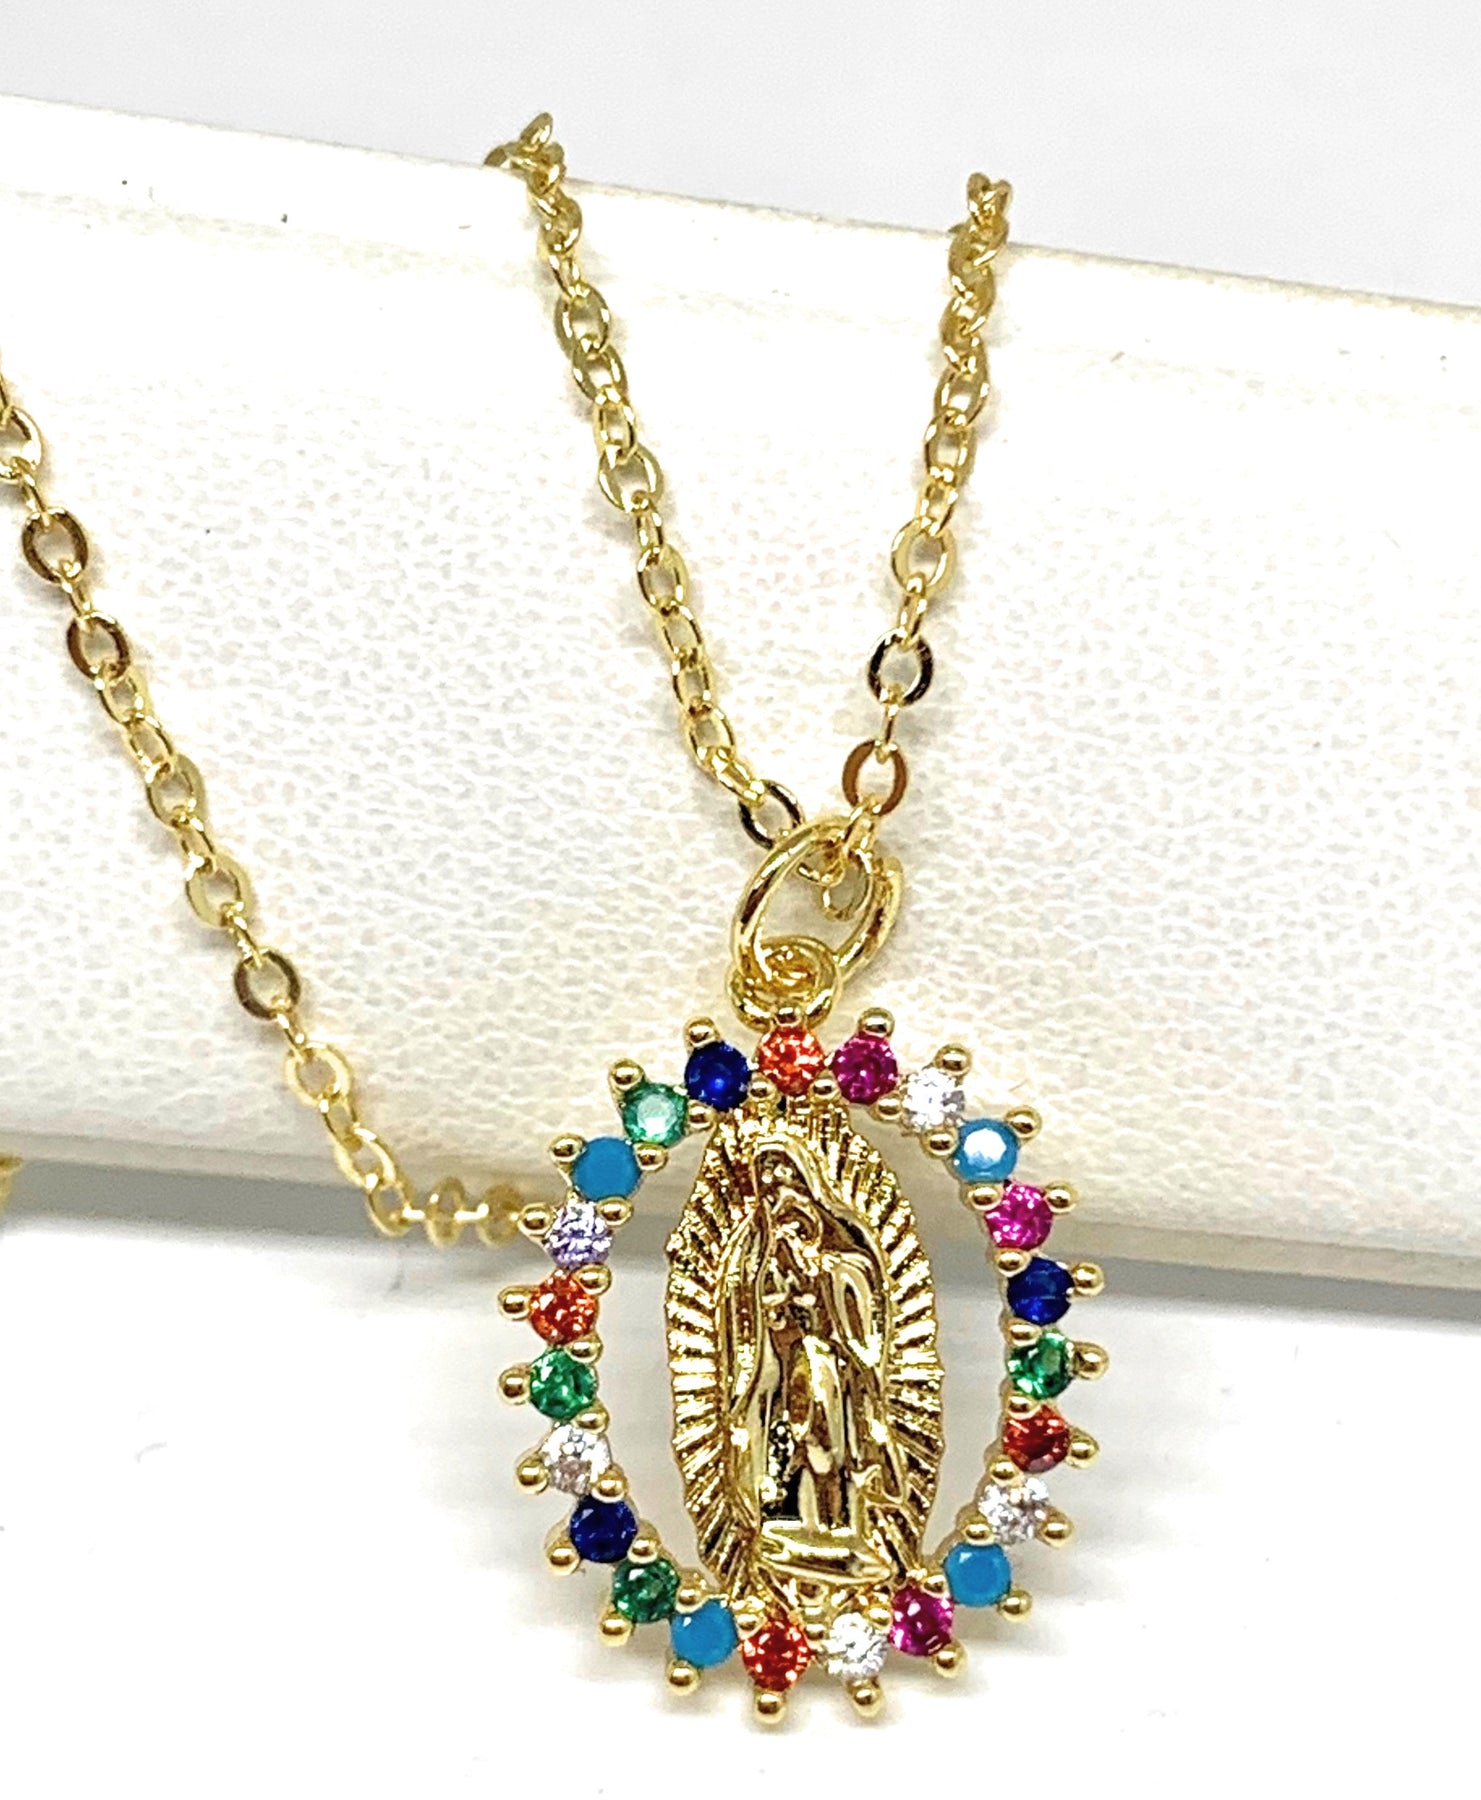 Gold Virgin Mary Necklace - Micro Guadalupe Piece - IF & Co.